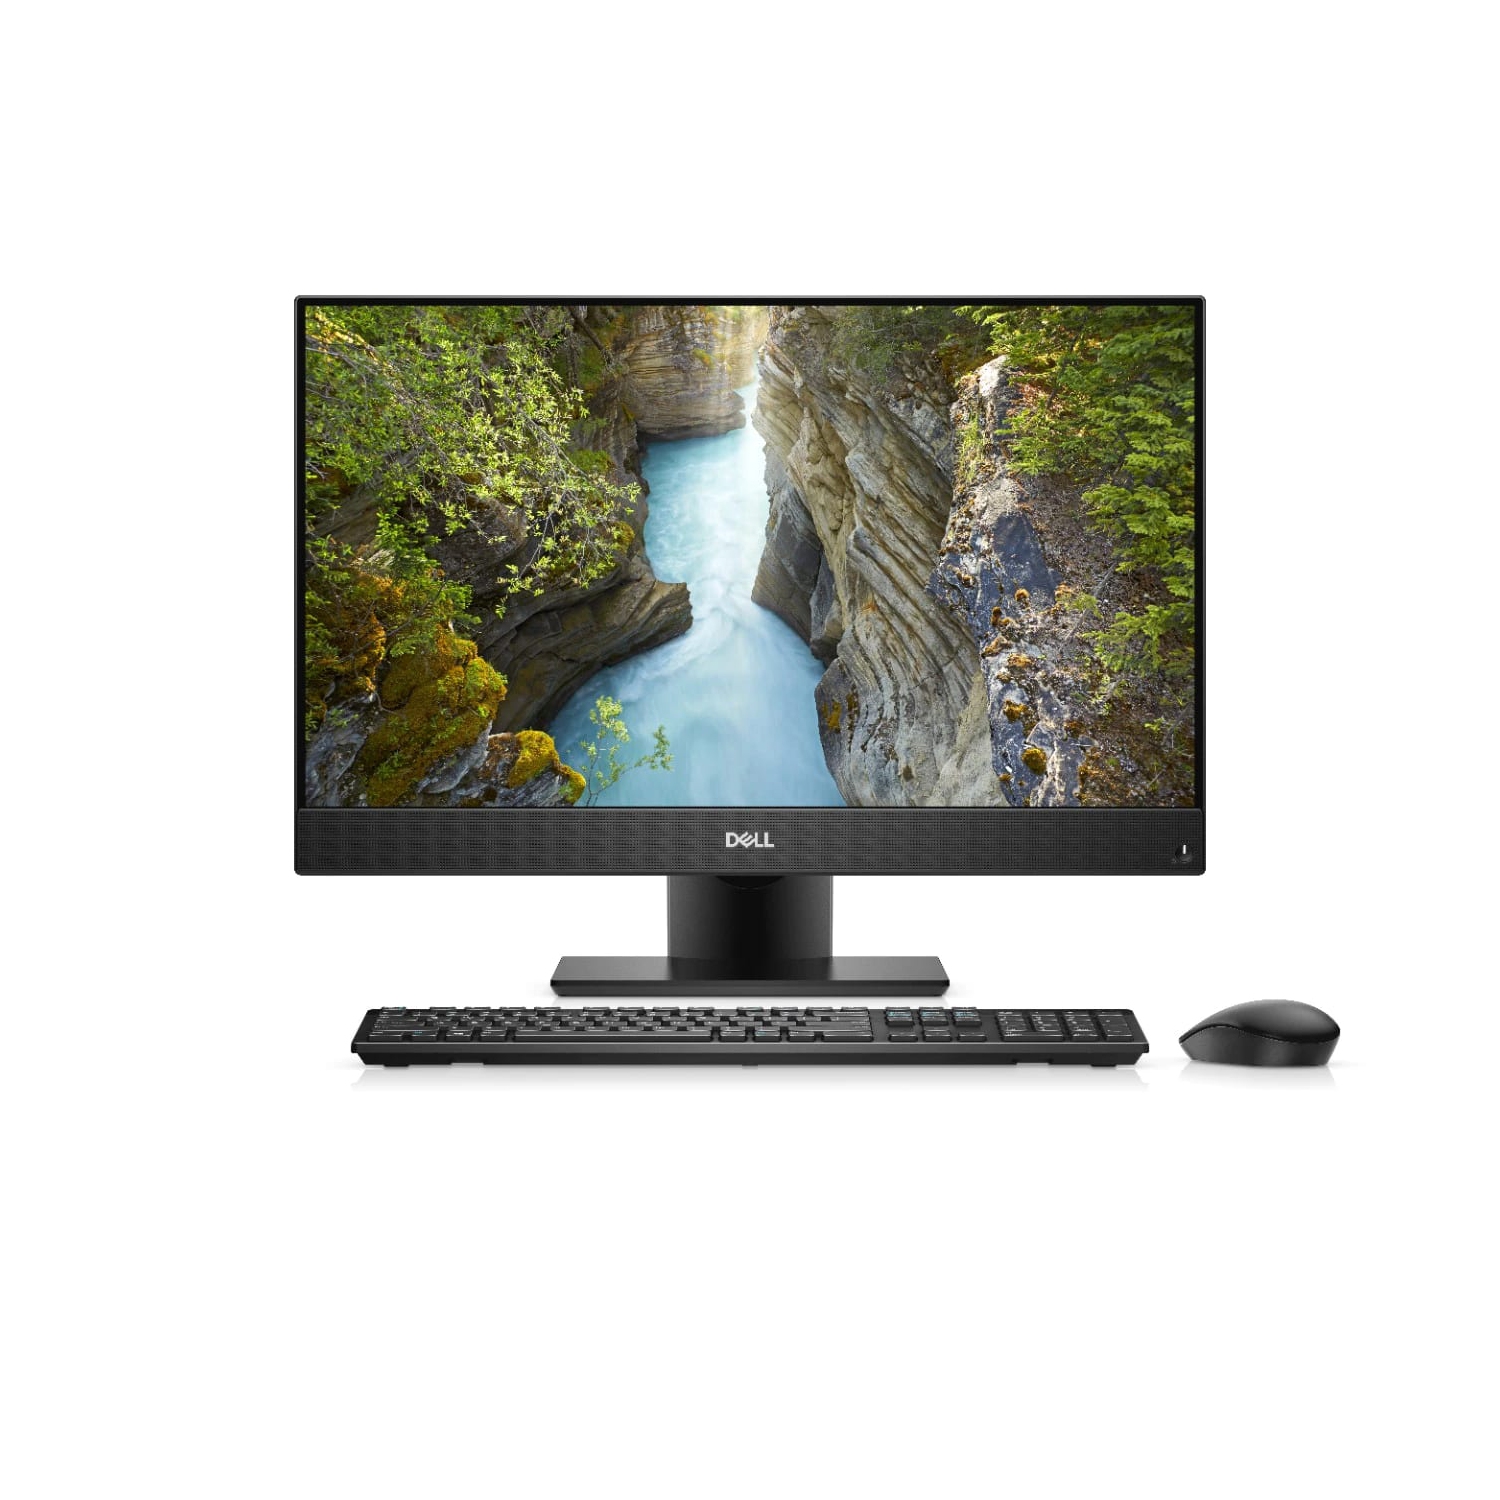 Refurbished (Excellent) - Dell OptiPlex 5000 5480 AIO (2020), 23.8" FHD, Core i5 - 256GB SSD - 8GB RAM - GTX 1050, 6 Cores @ 4.5 GHz - 10th Gen CPU Certified Refurbished